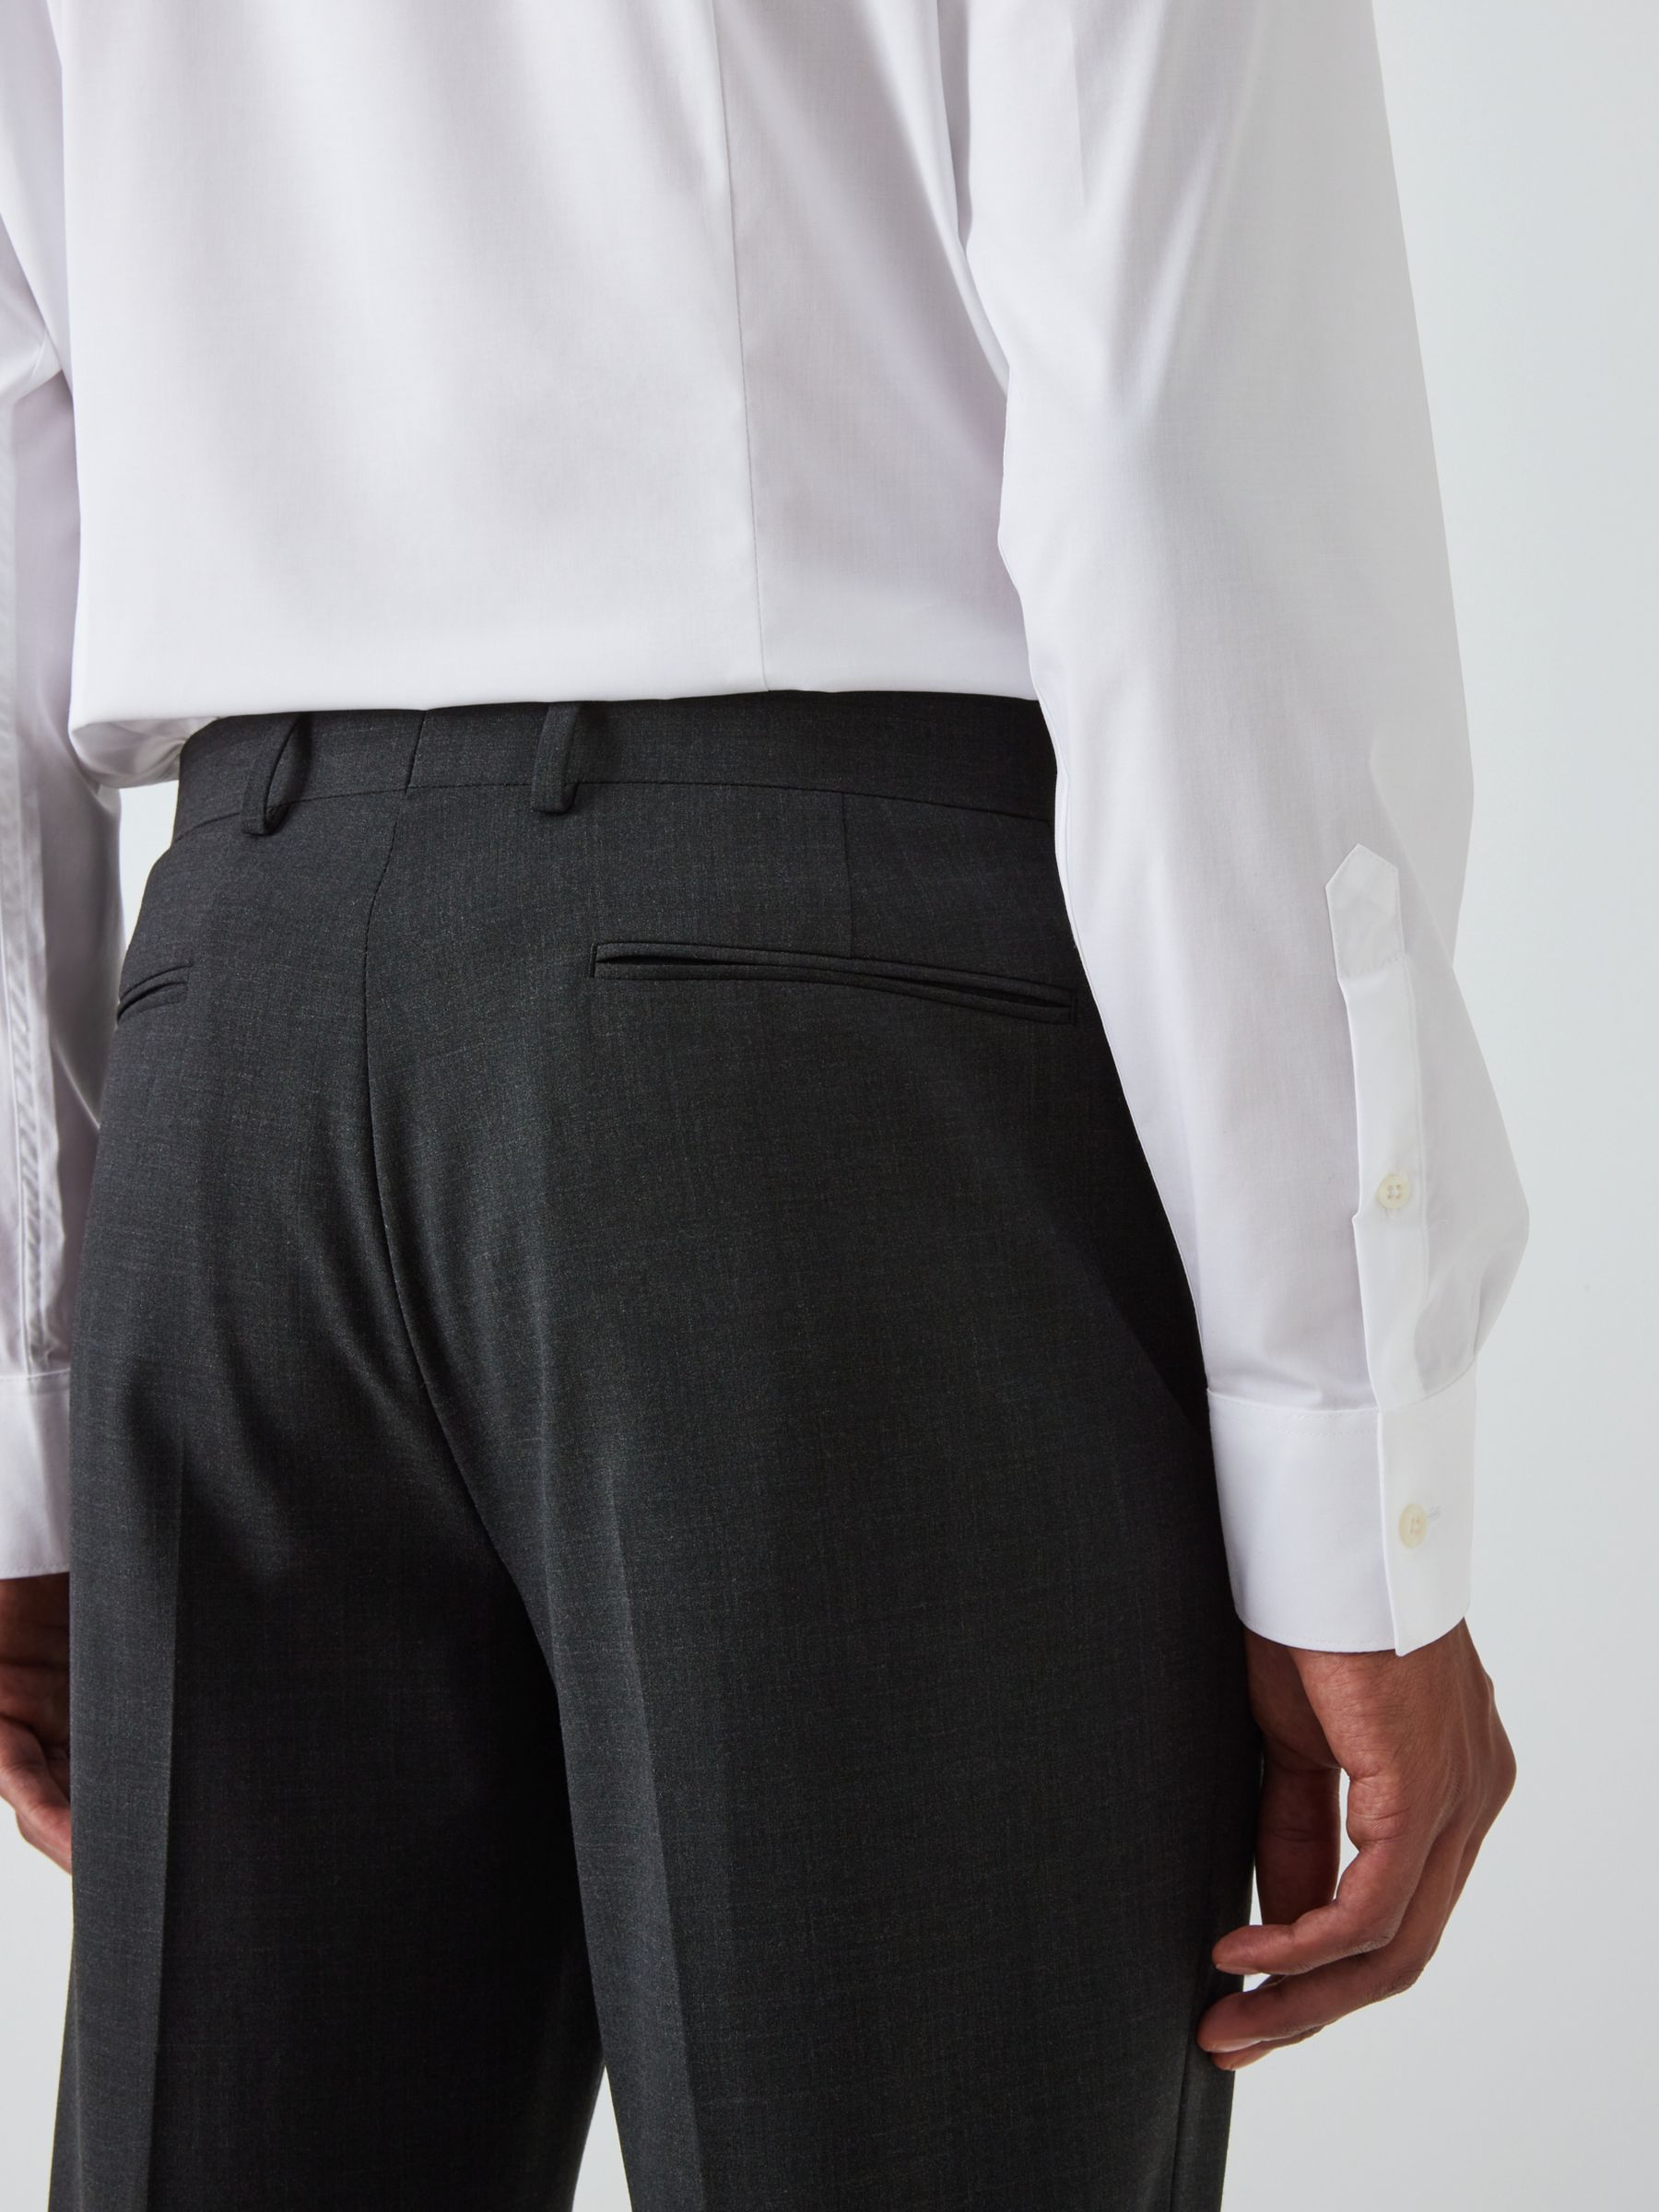 Buy Kin Wool Blend Slim Fit Suit Trousers, Charcoal Online at johnlewis.com